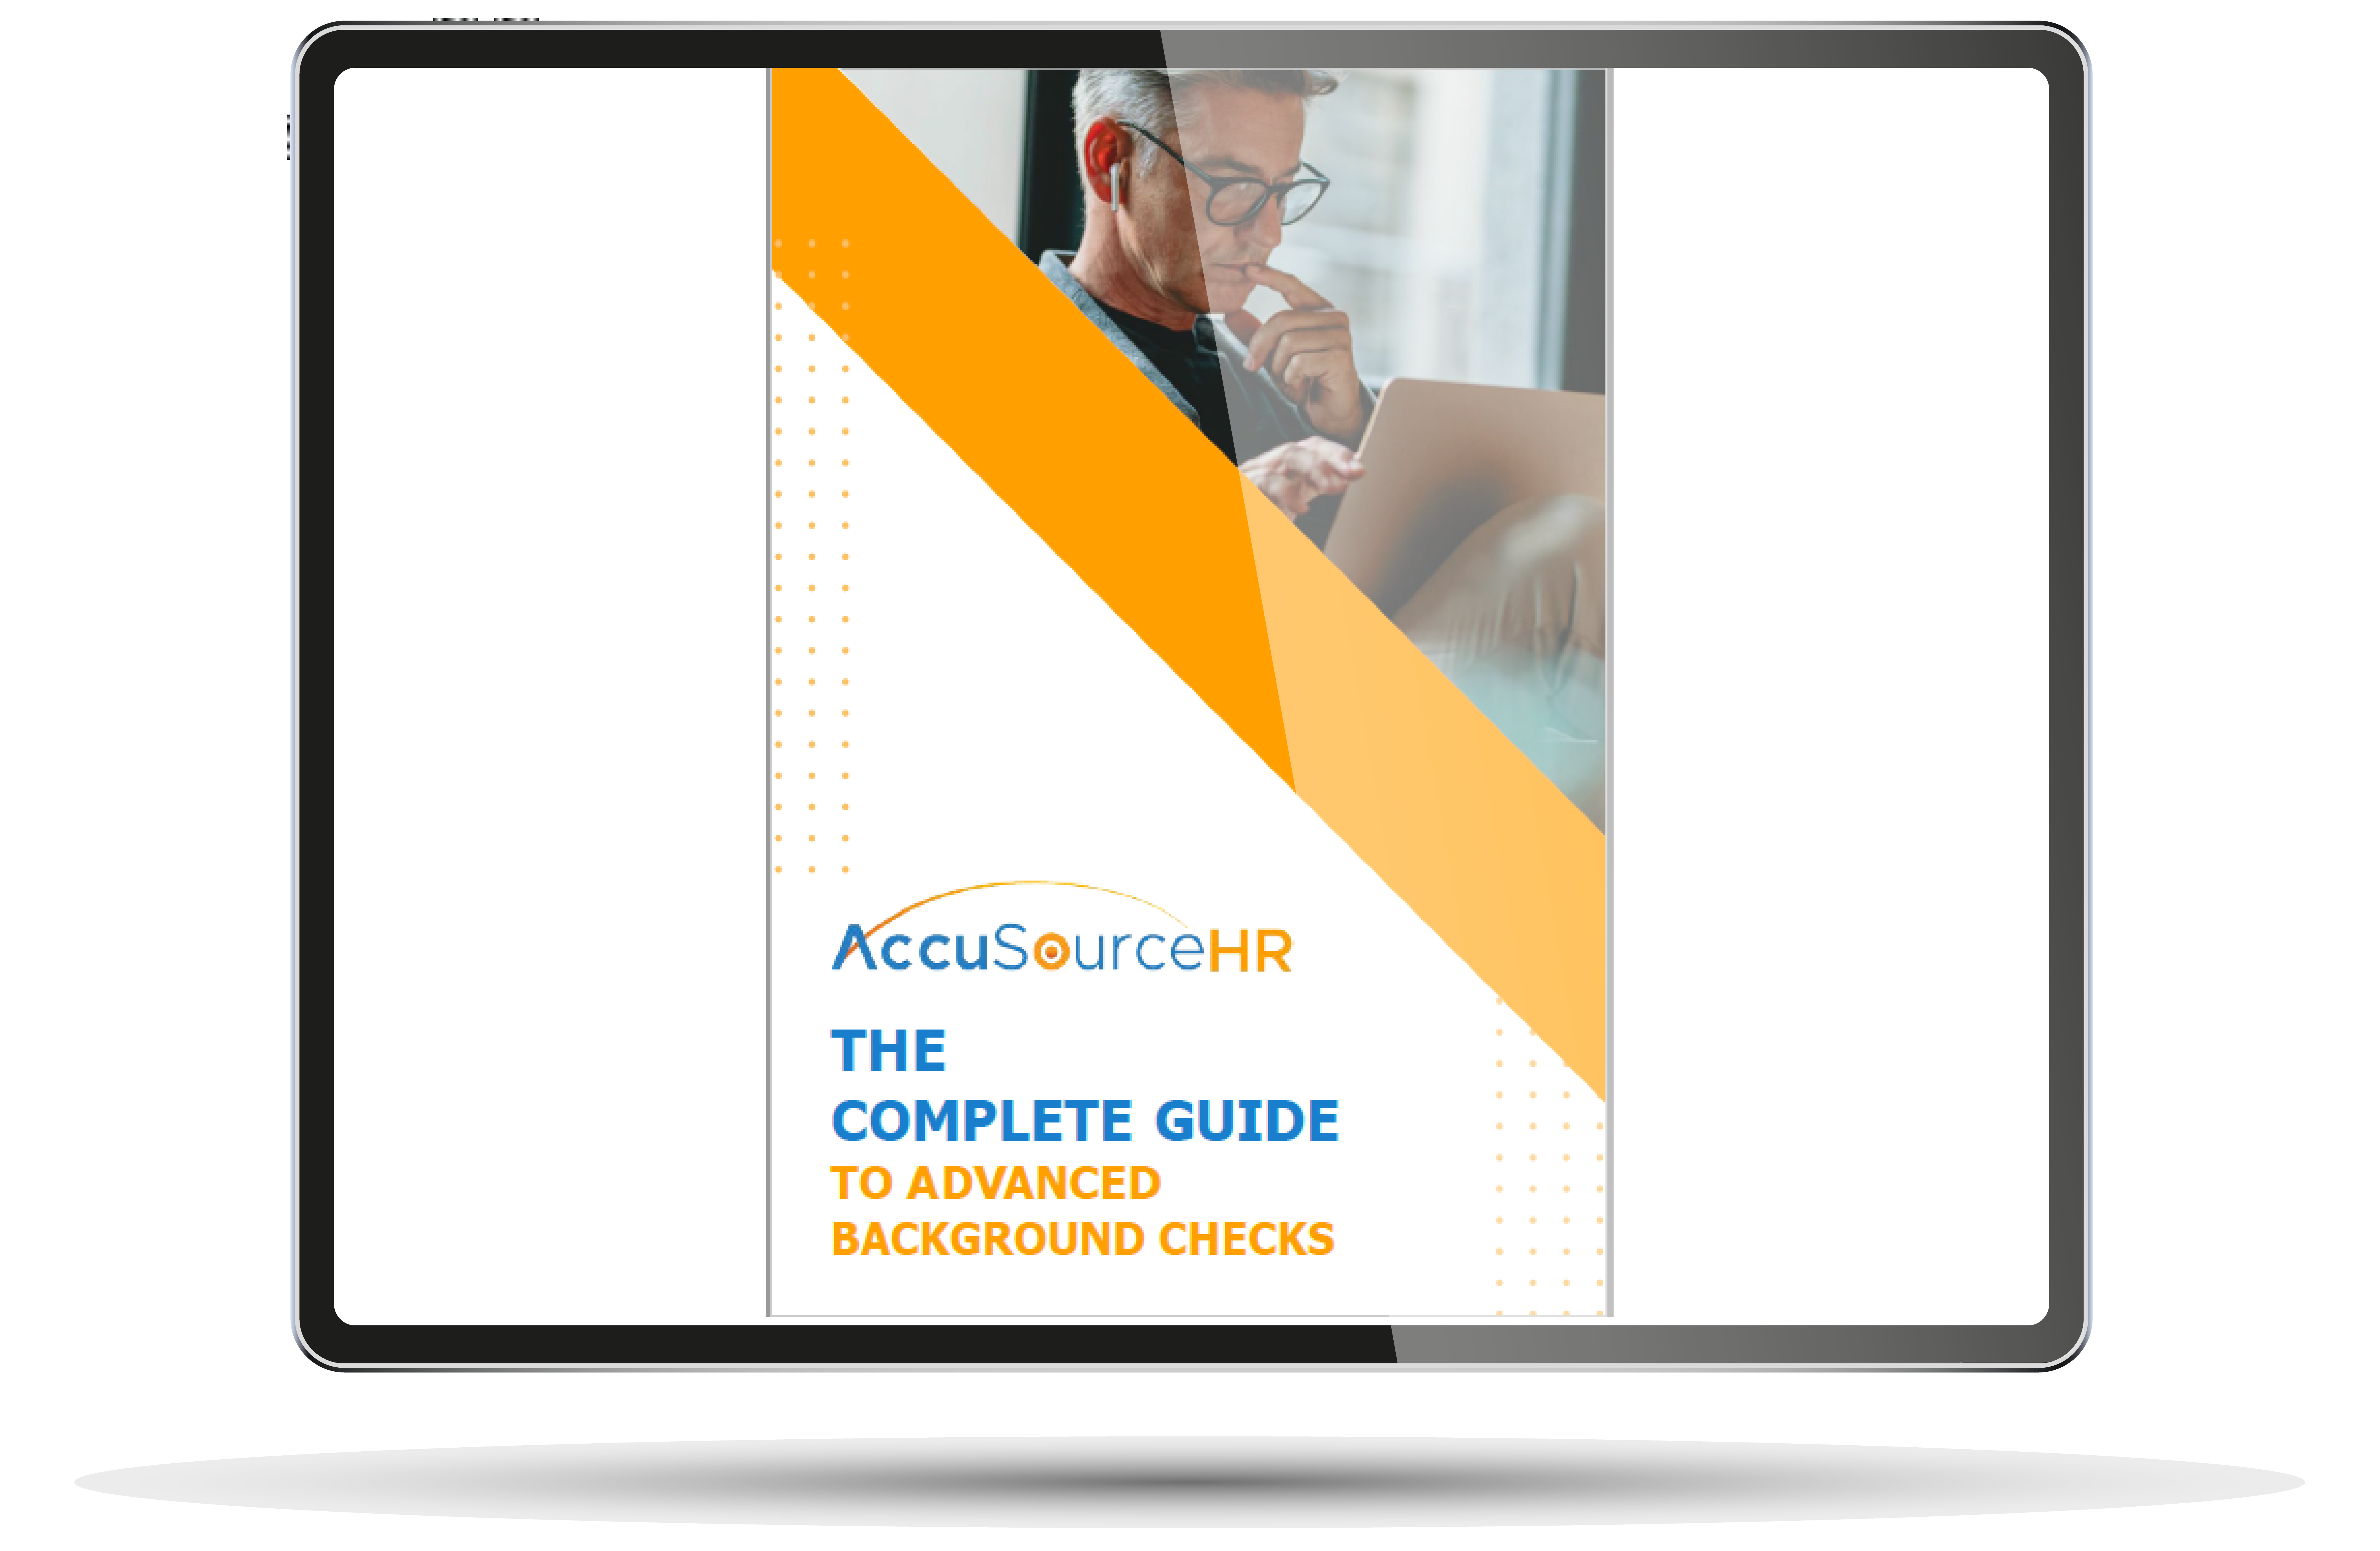 AccuSourceHR The Complete Guide To Advanced Background Checks-01